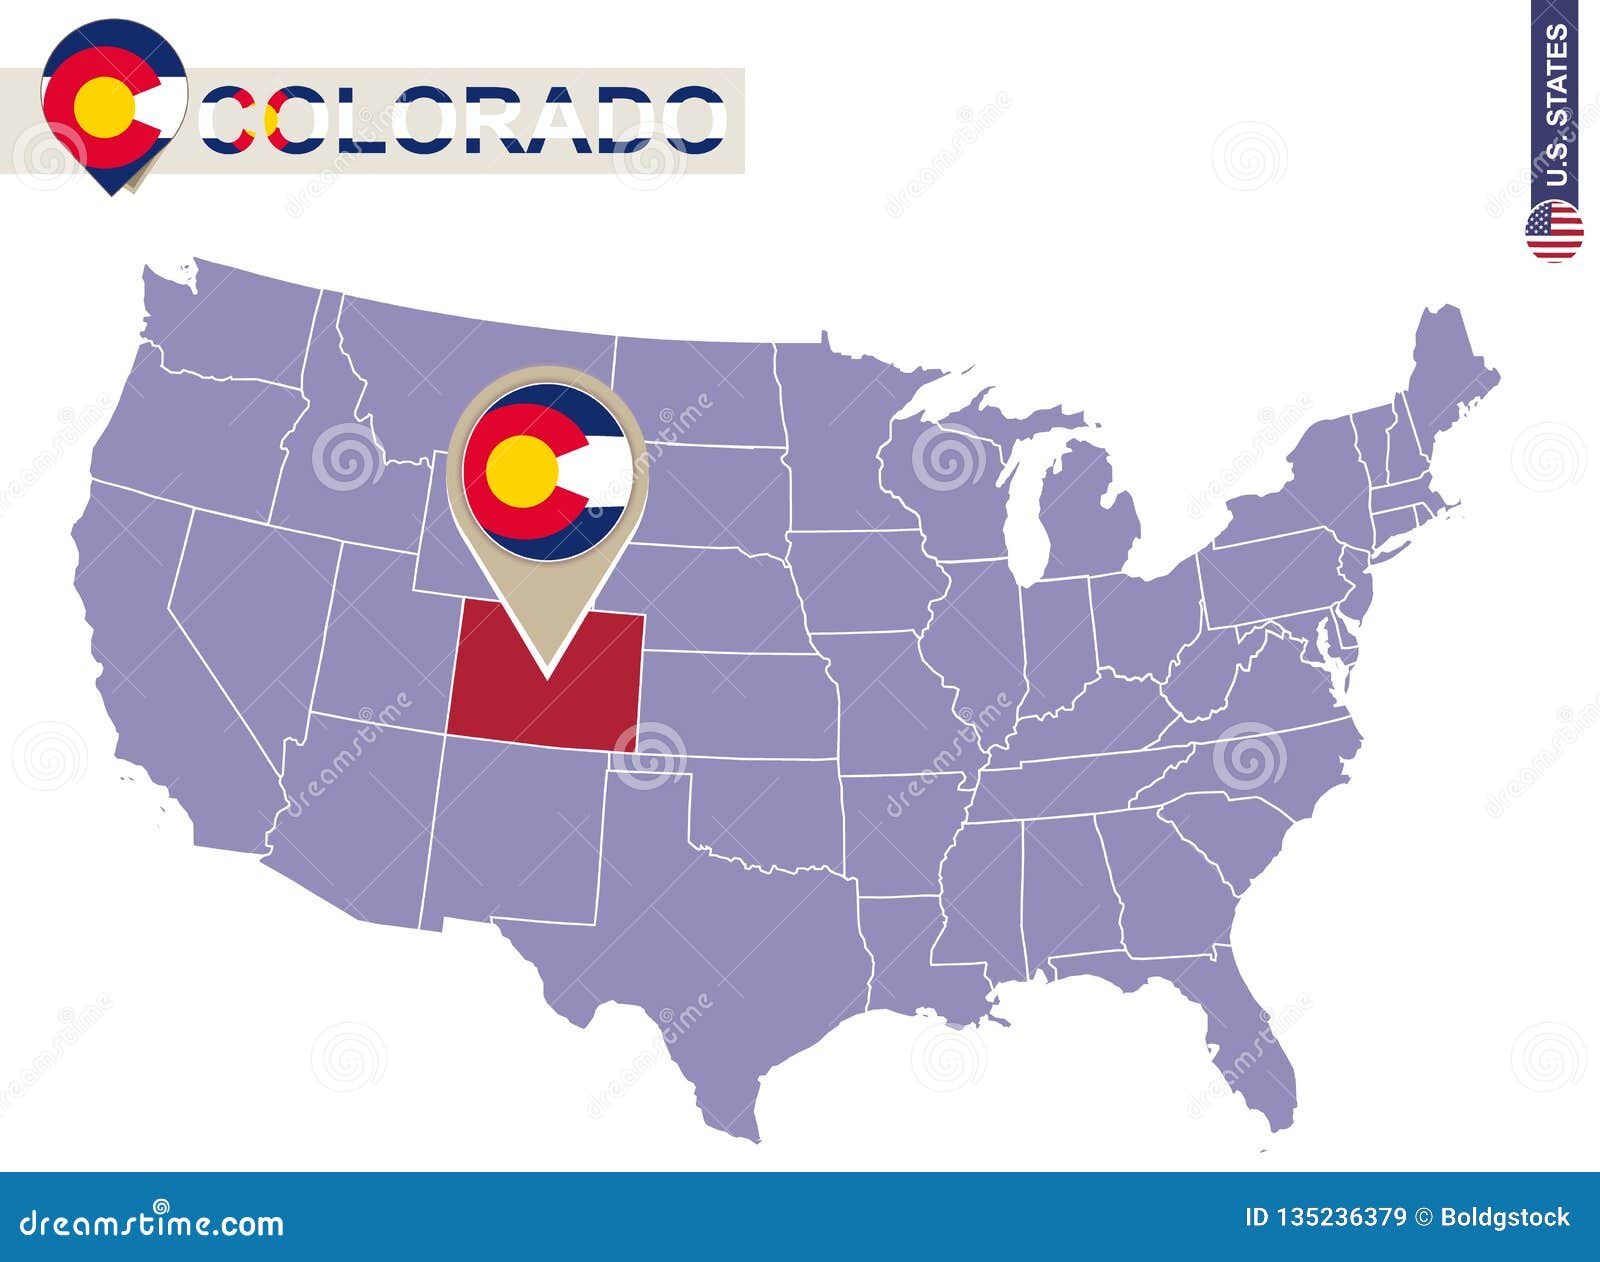 Colorado State On Usa Map Colorado Flag And Map Stock Vector